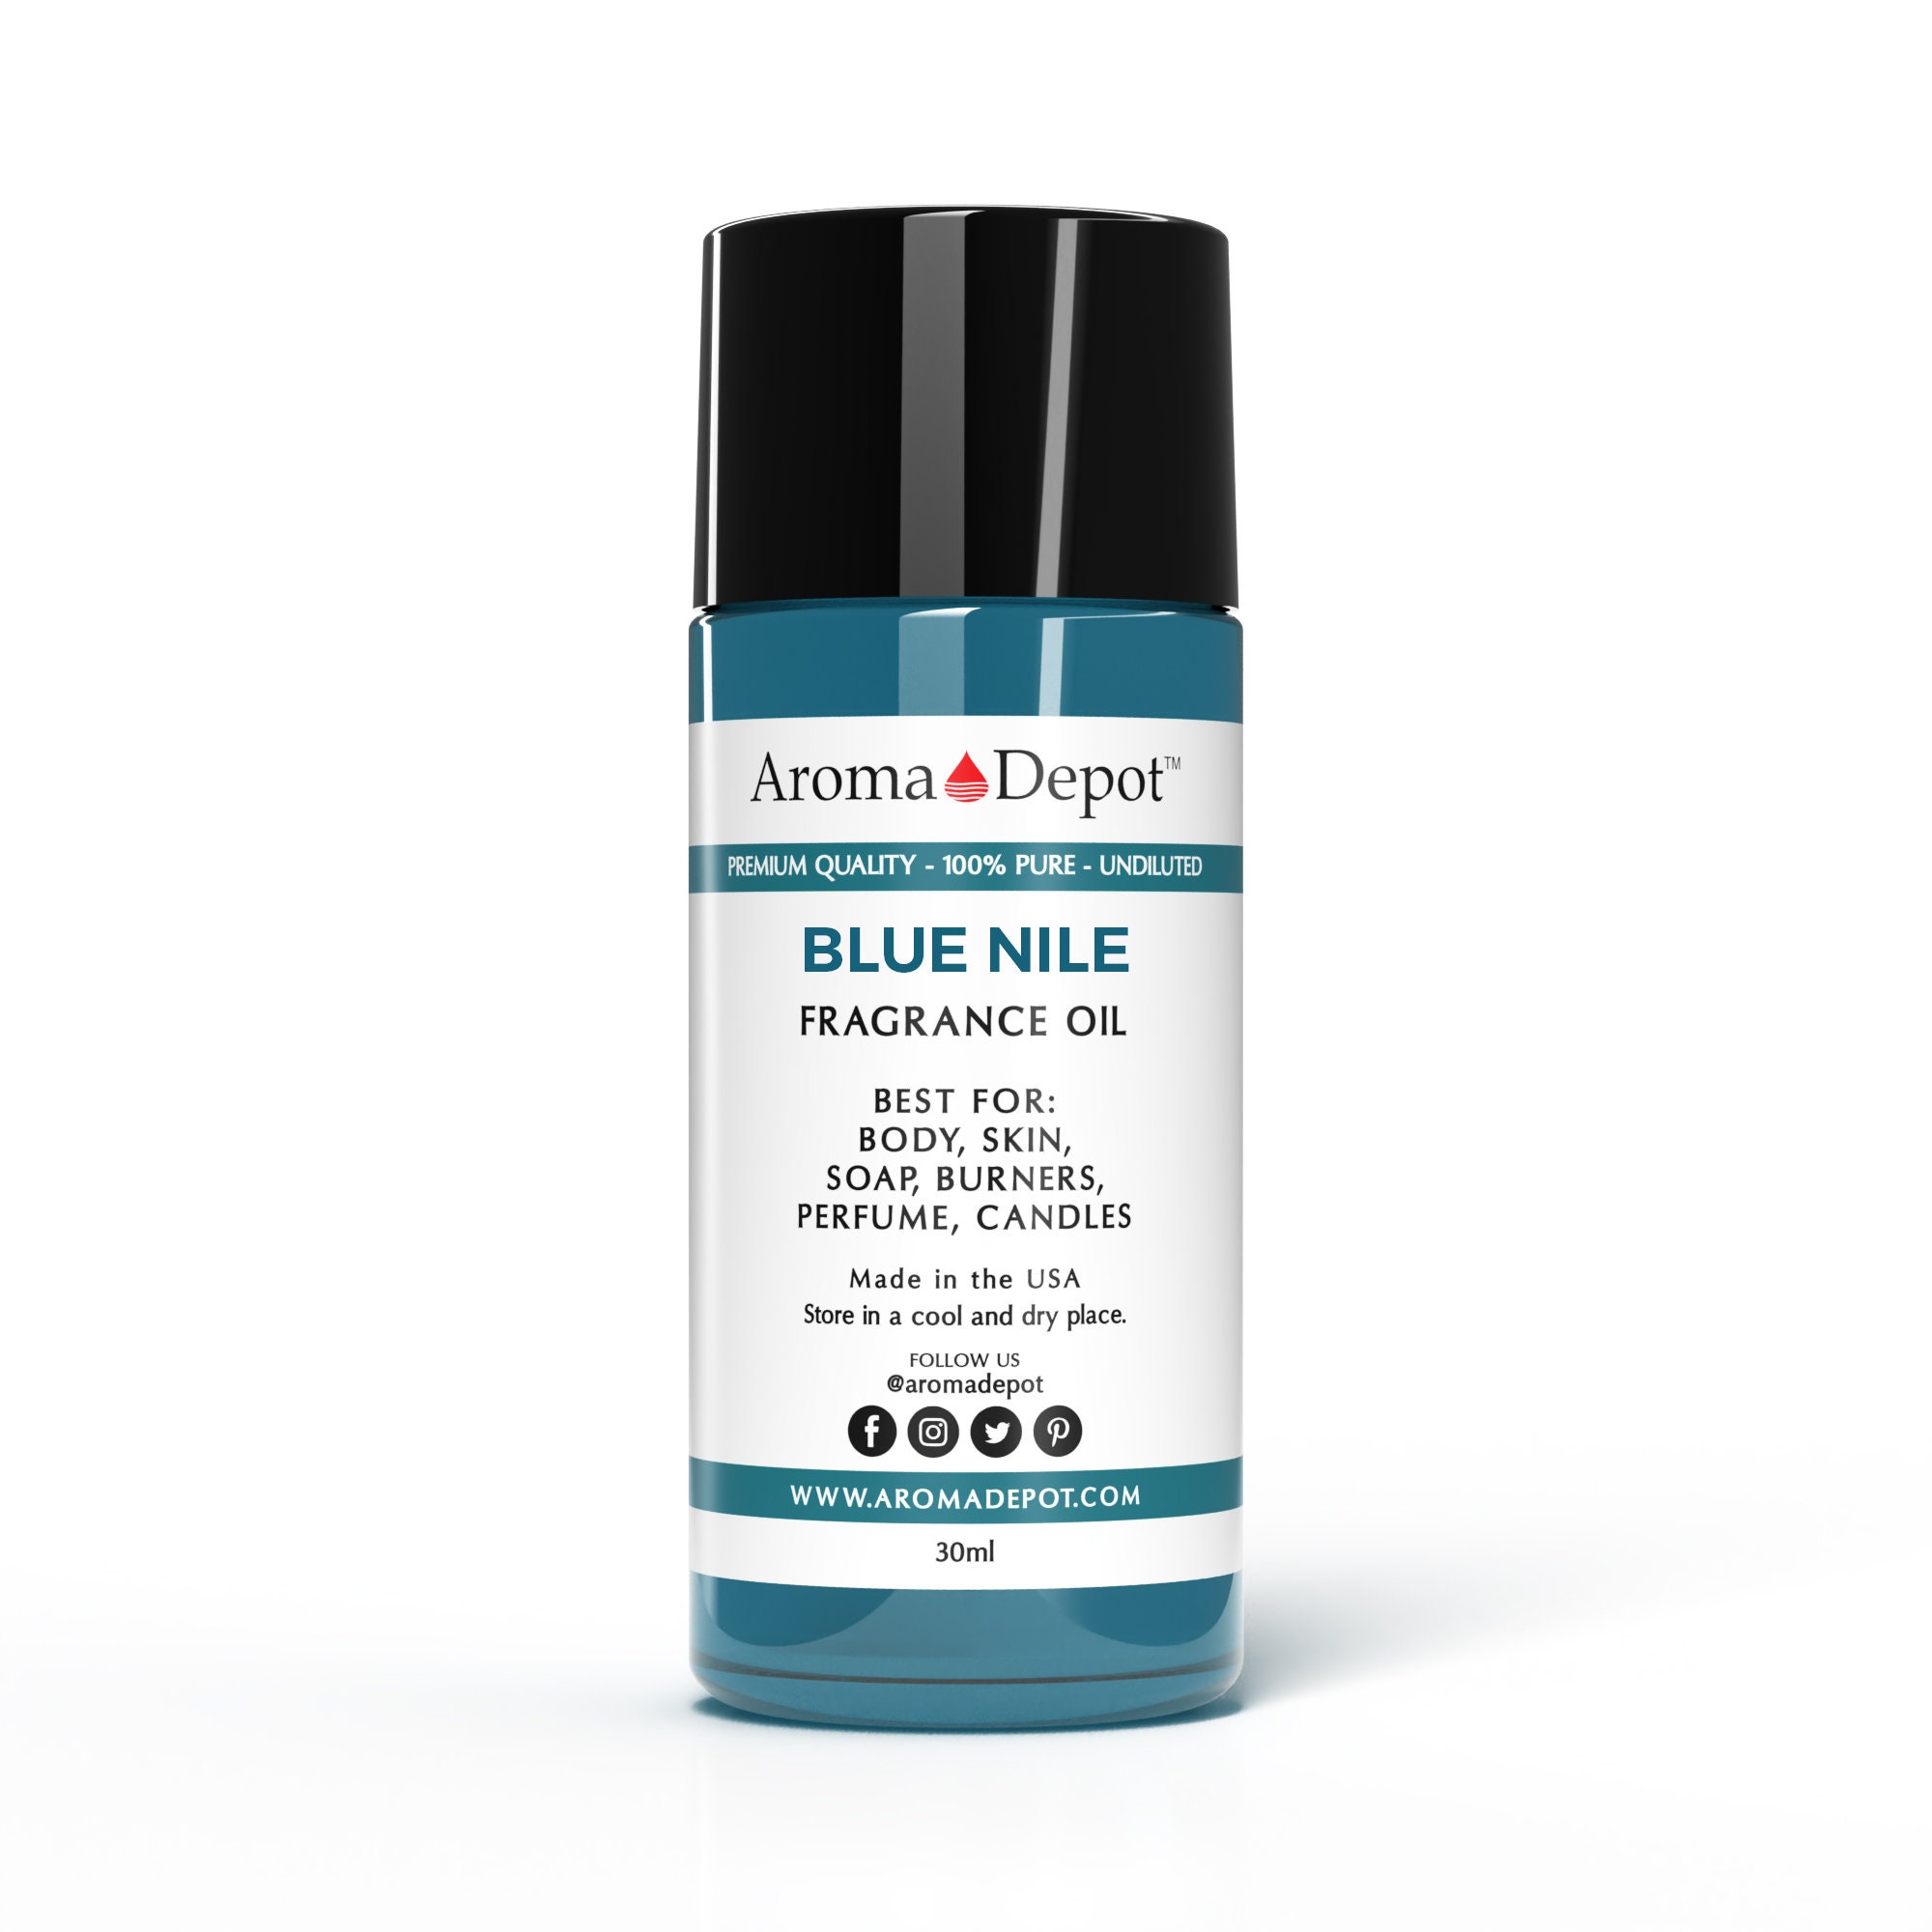  Aroma Depot 1oz / 30ml Blue Nile Perfume Oil for making, Body  Oil, Soap, Candle Making & Incense. Our version is a Premium Quality  Undiluted & Alcohol Free : Health